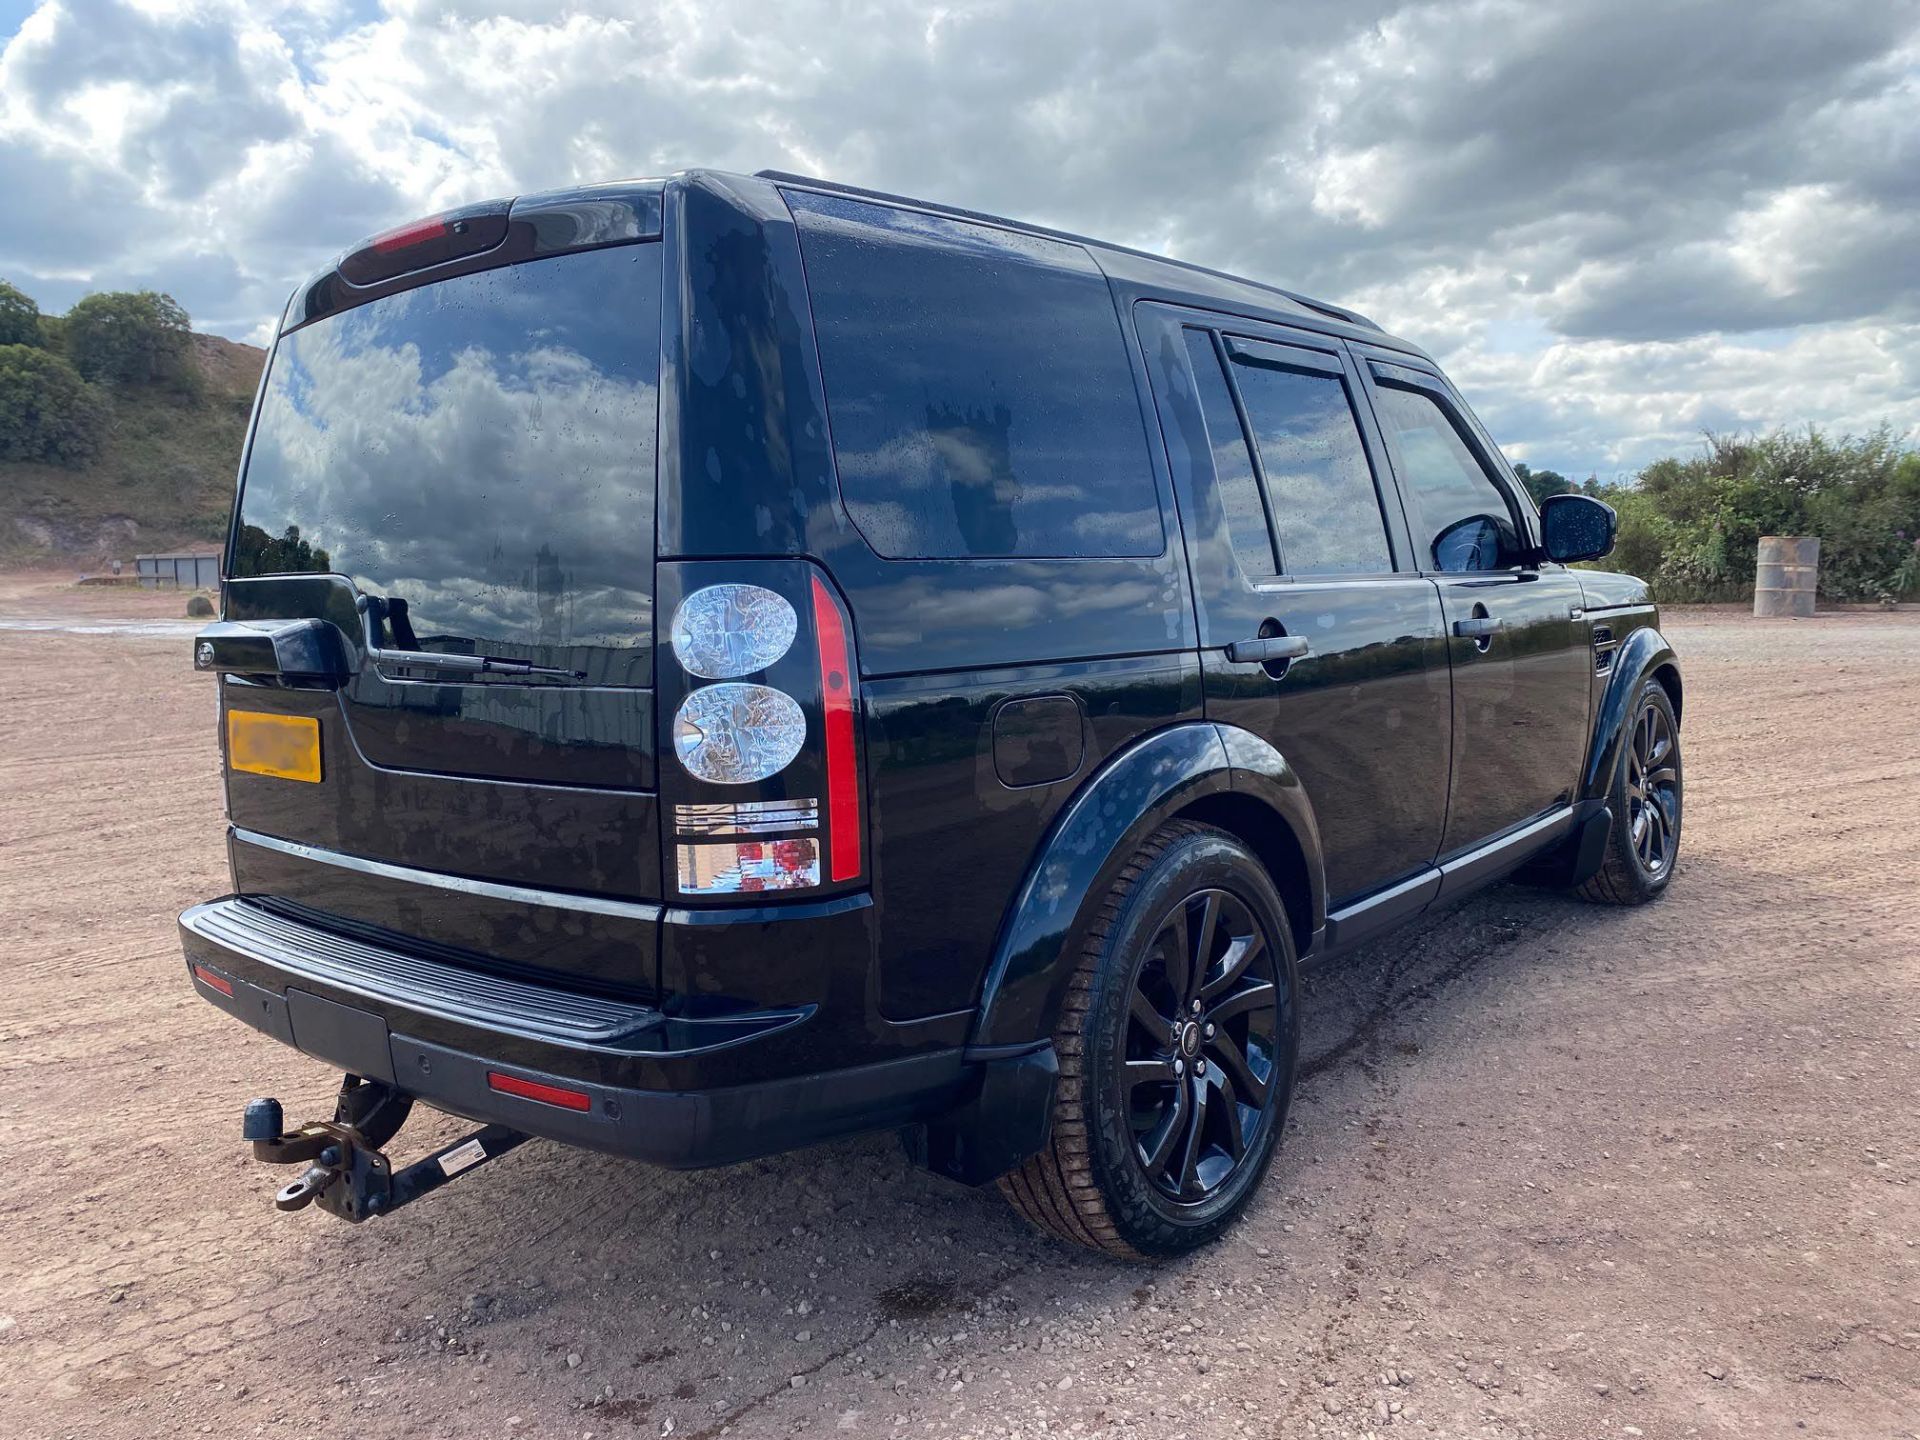 2015 LAND ROVER DISCOVERY XS SDV6 AUTO BLACK CONVERTED COMMERCIAL – WITH REAR SEAT CONVERSION - Image 4 of 16